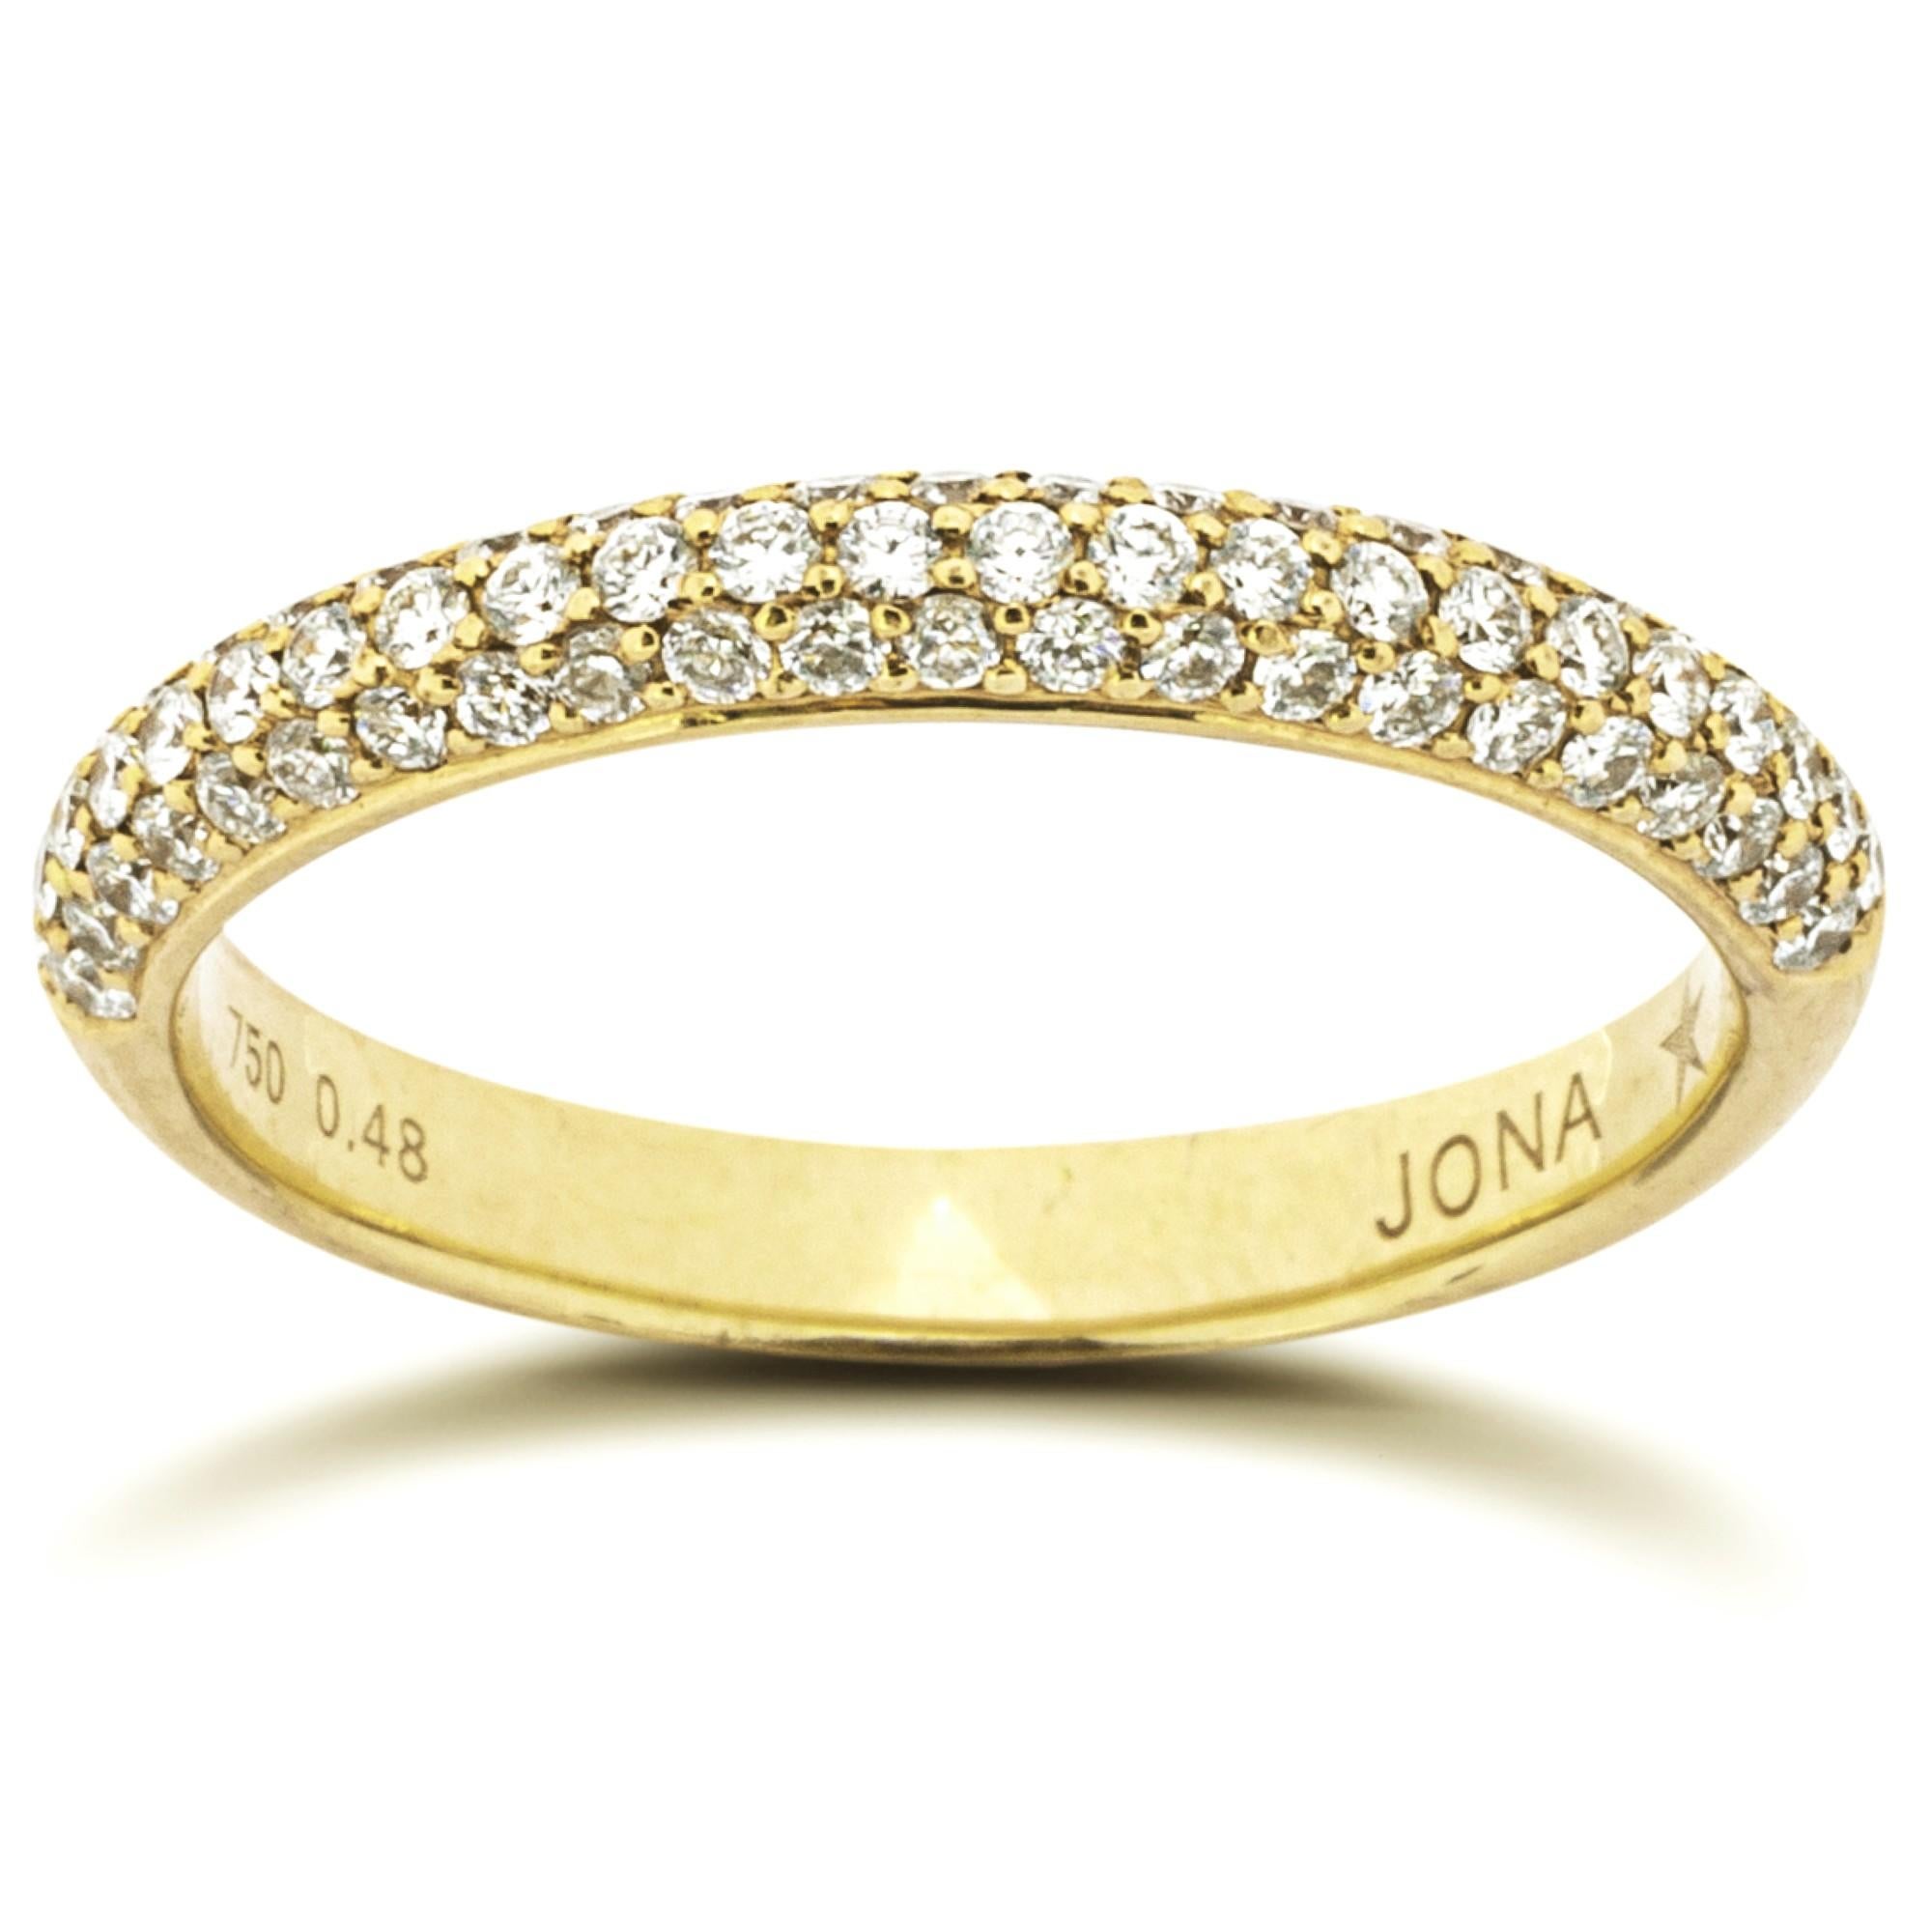 Alex Jona White Diamond 18 Karat Yellow Gold Band Ring In New Condition For Sale In Torino, IT